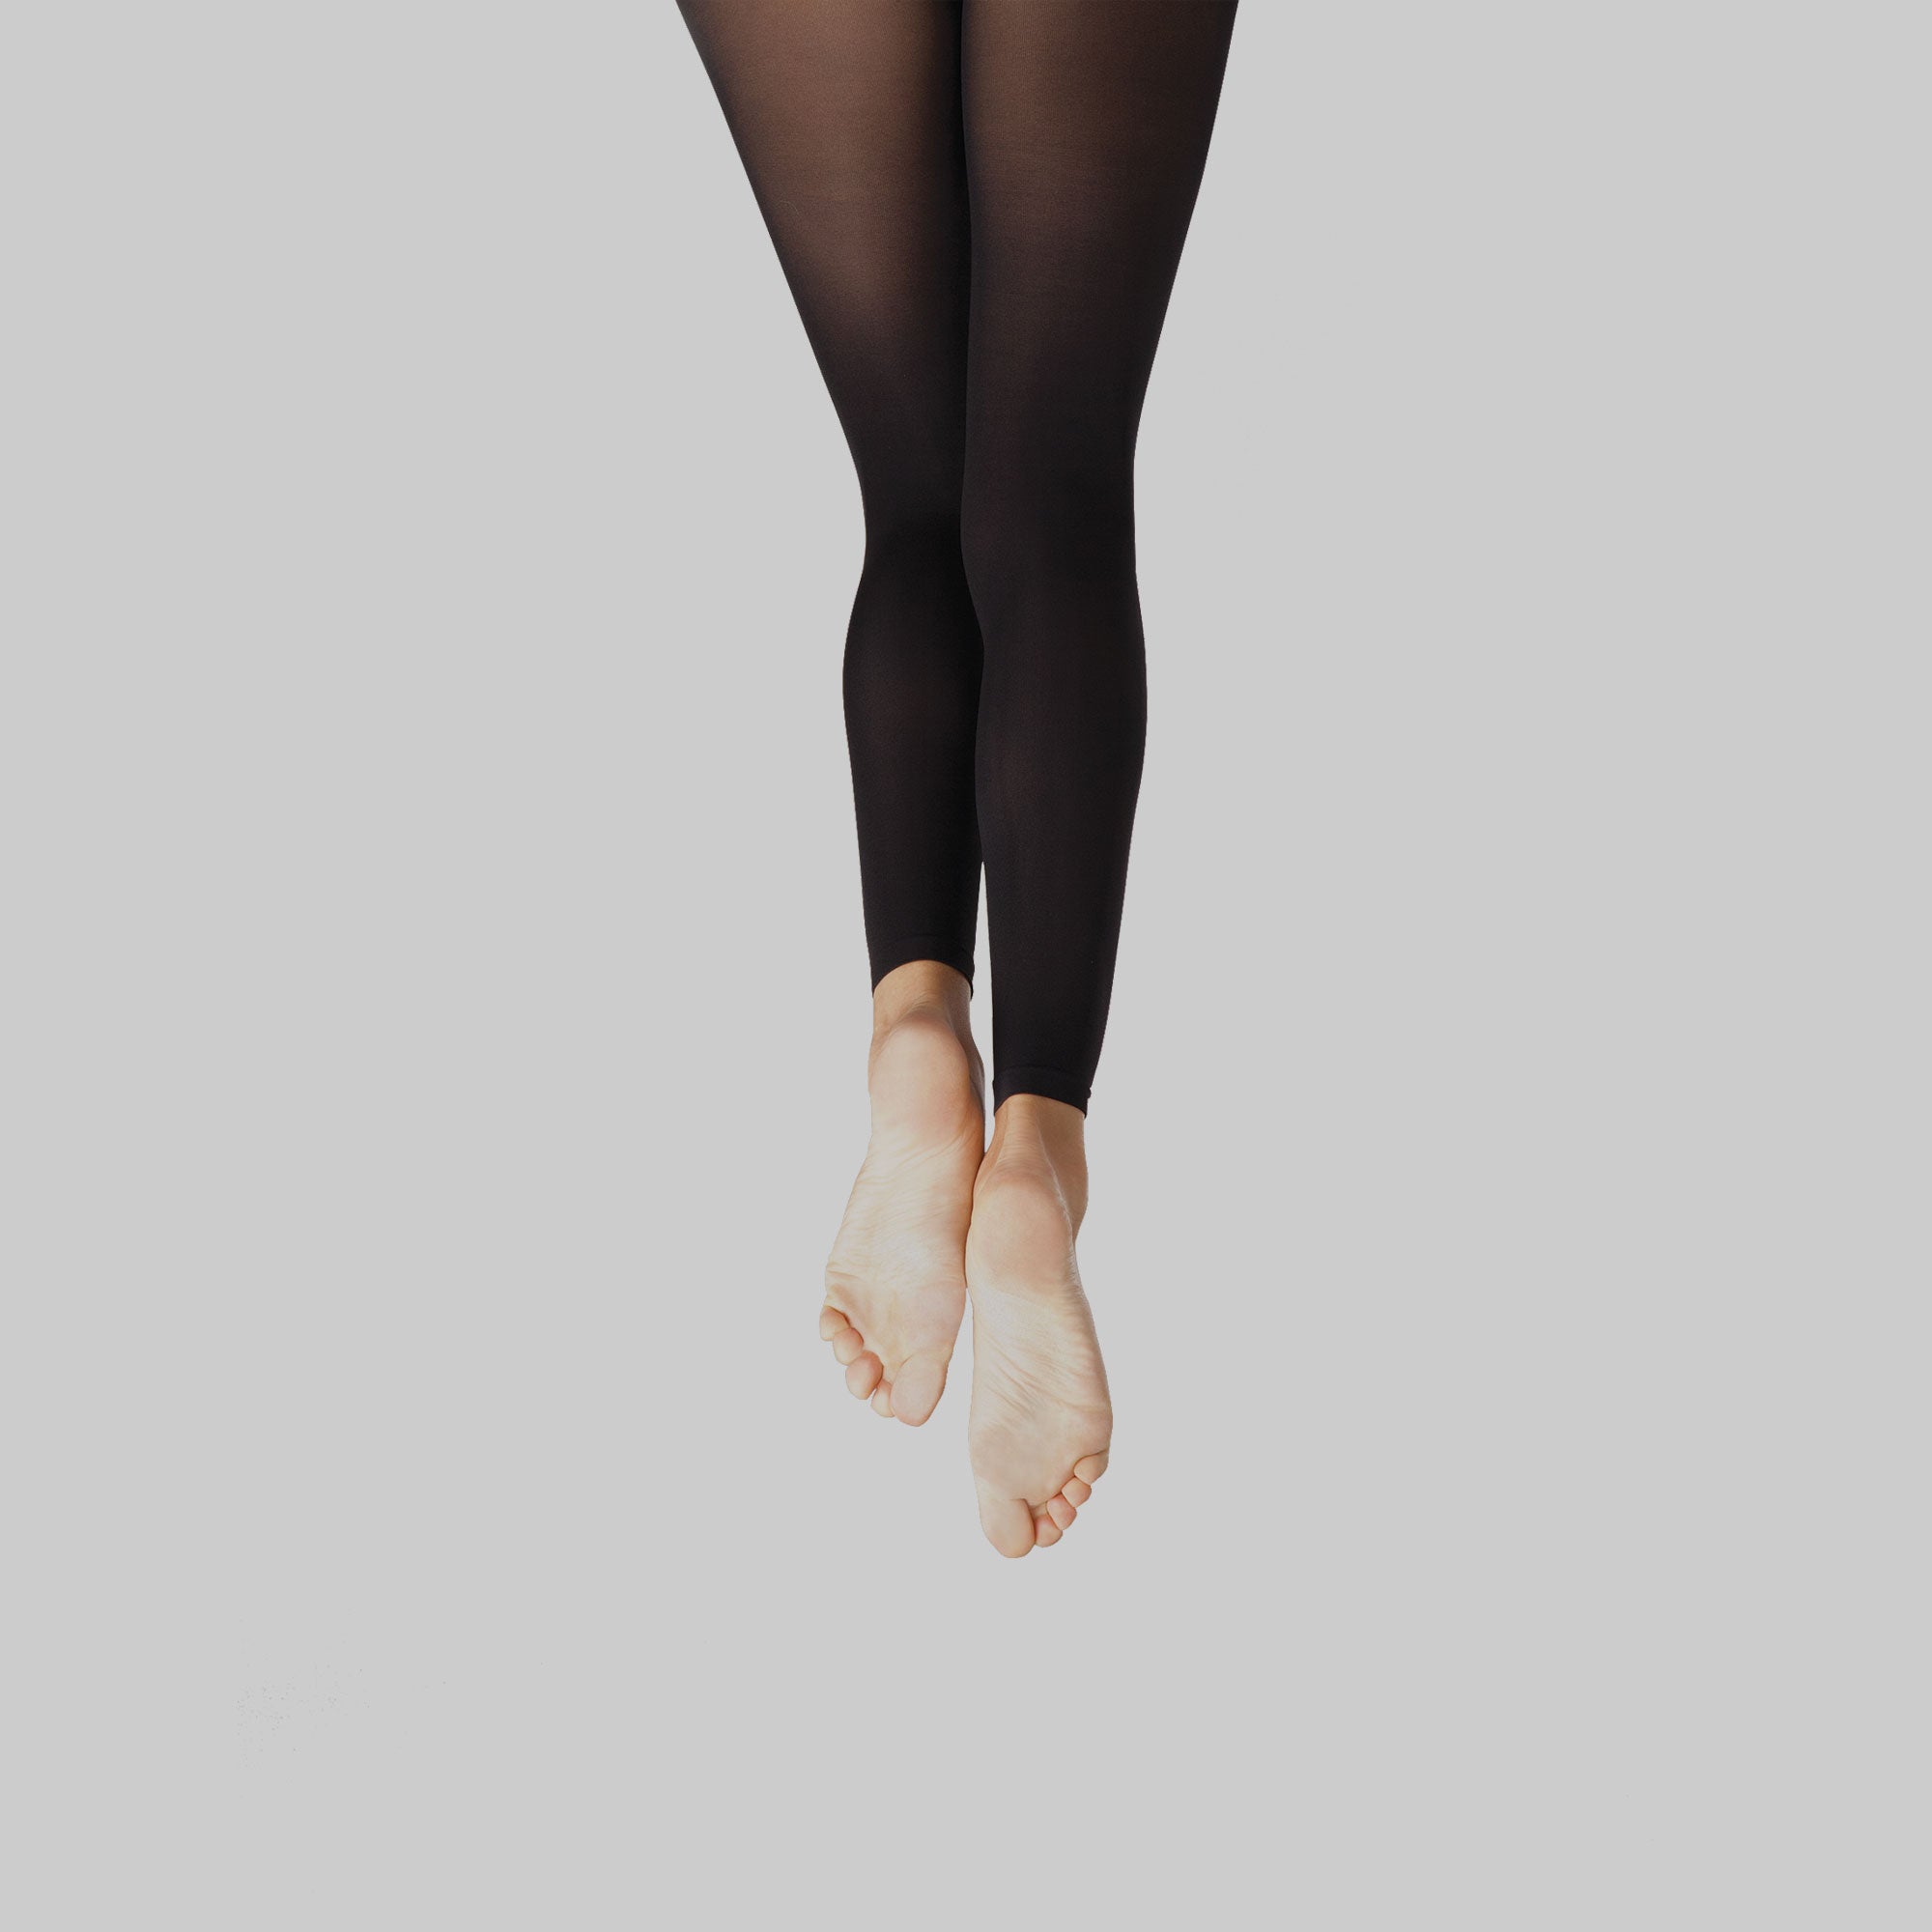 Foot Traffic, Cable Twist Footless Tights (Black) at